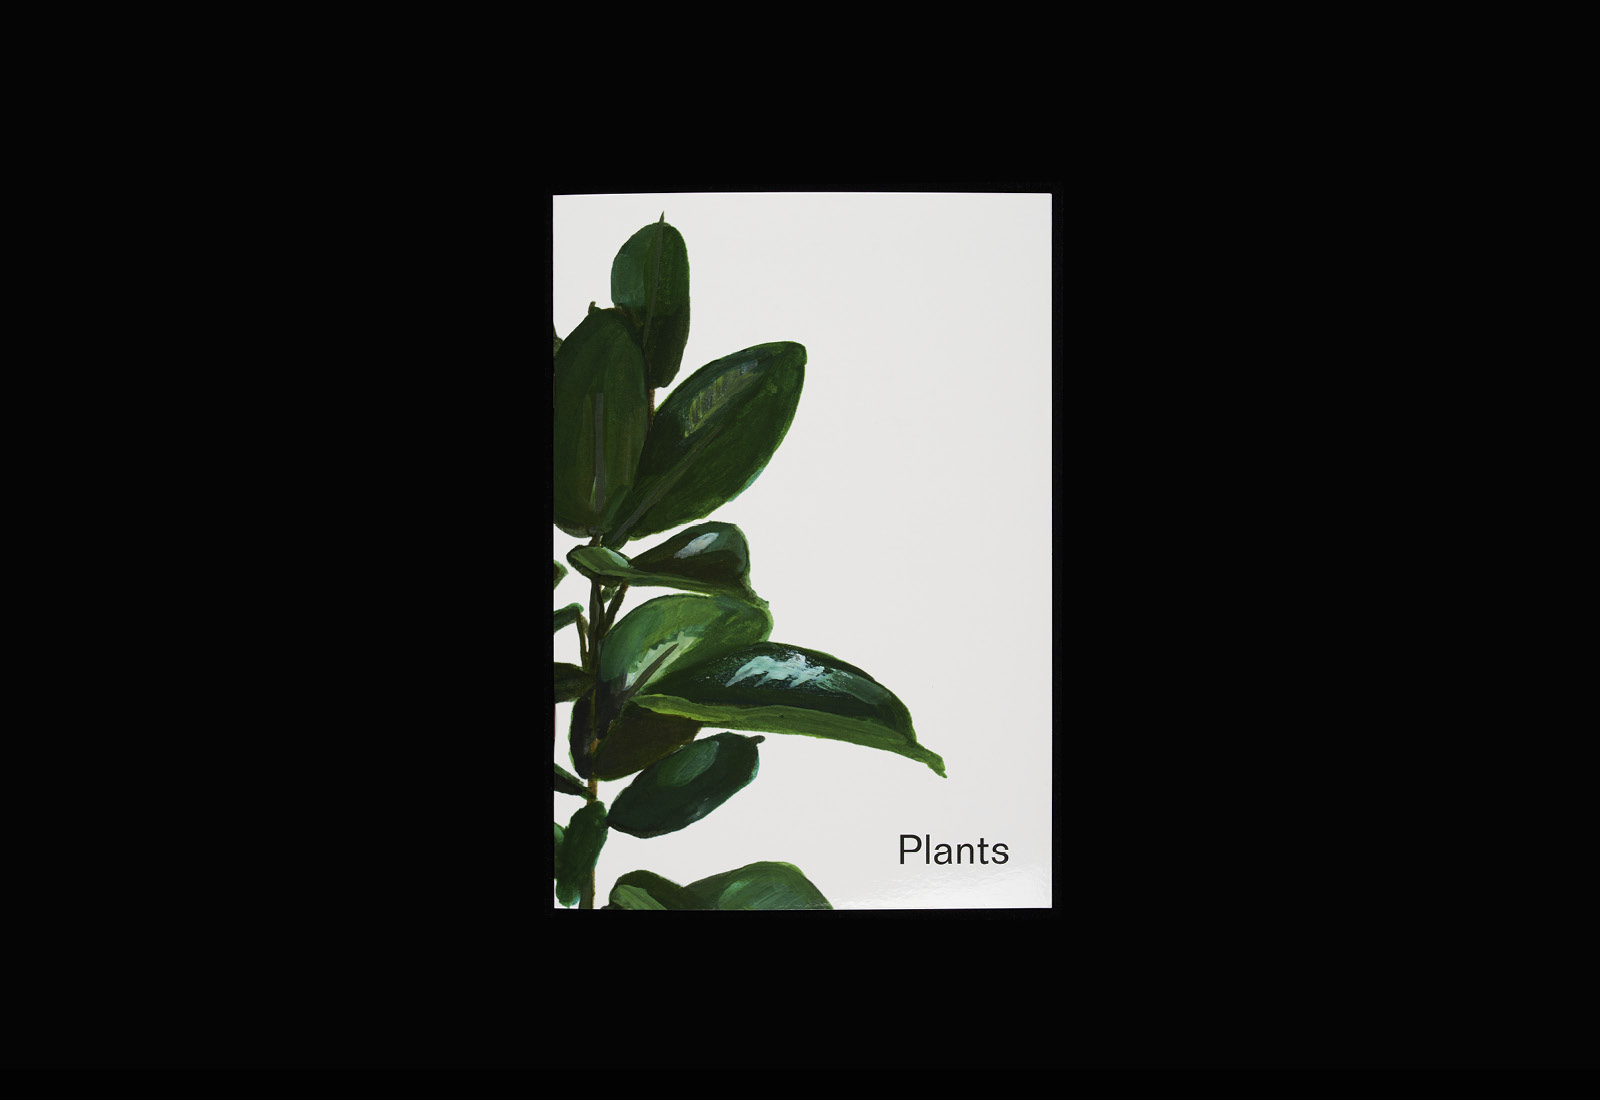 Plants, a brochure designed by Studio Hi Ho featuring illustration by Anna Skeels for residential development Nth Fitzroy